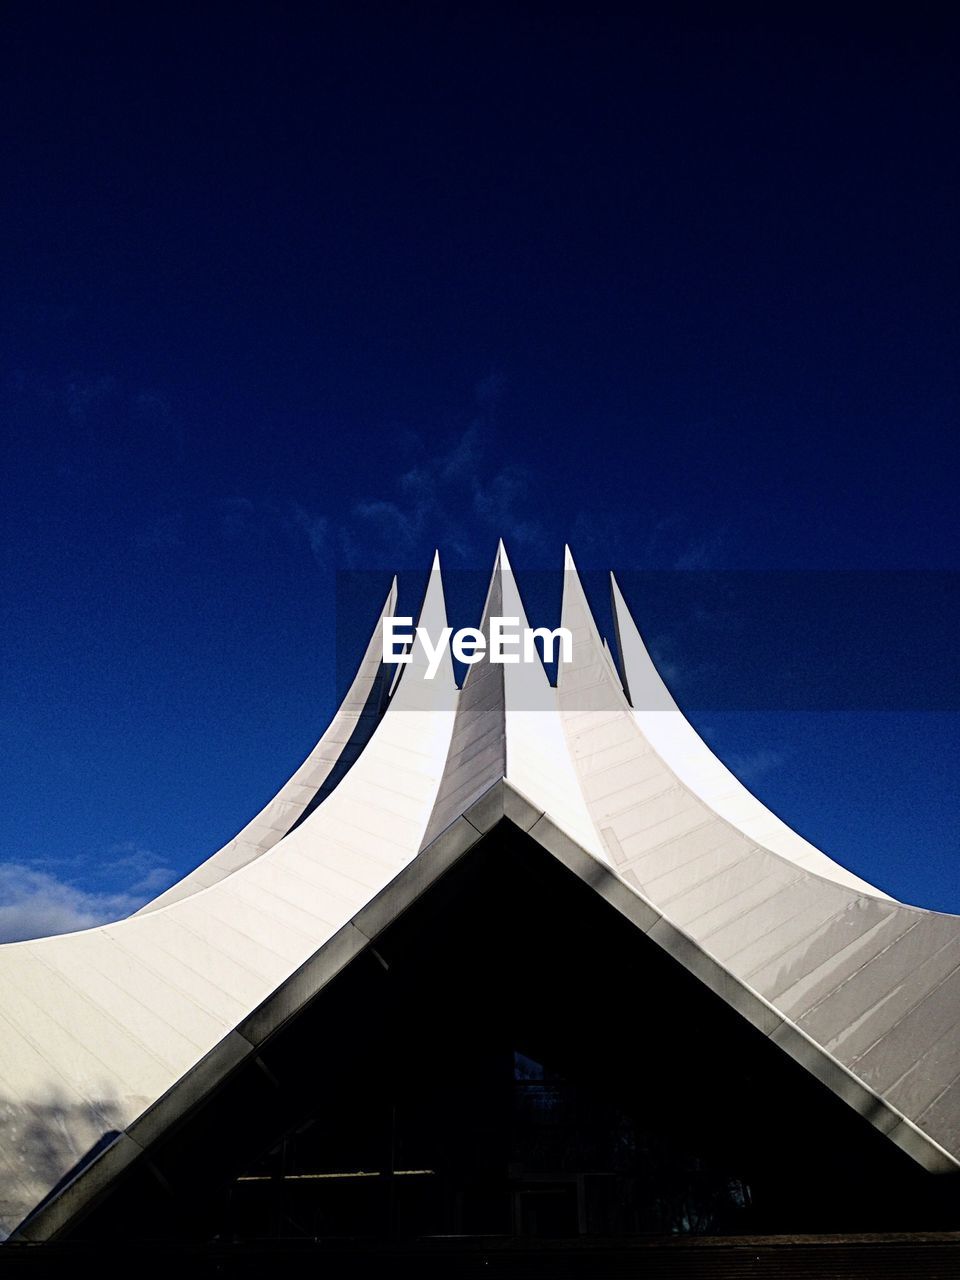 Low angle view of tempodrom against blue sky